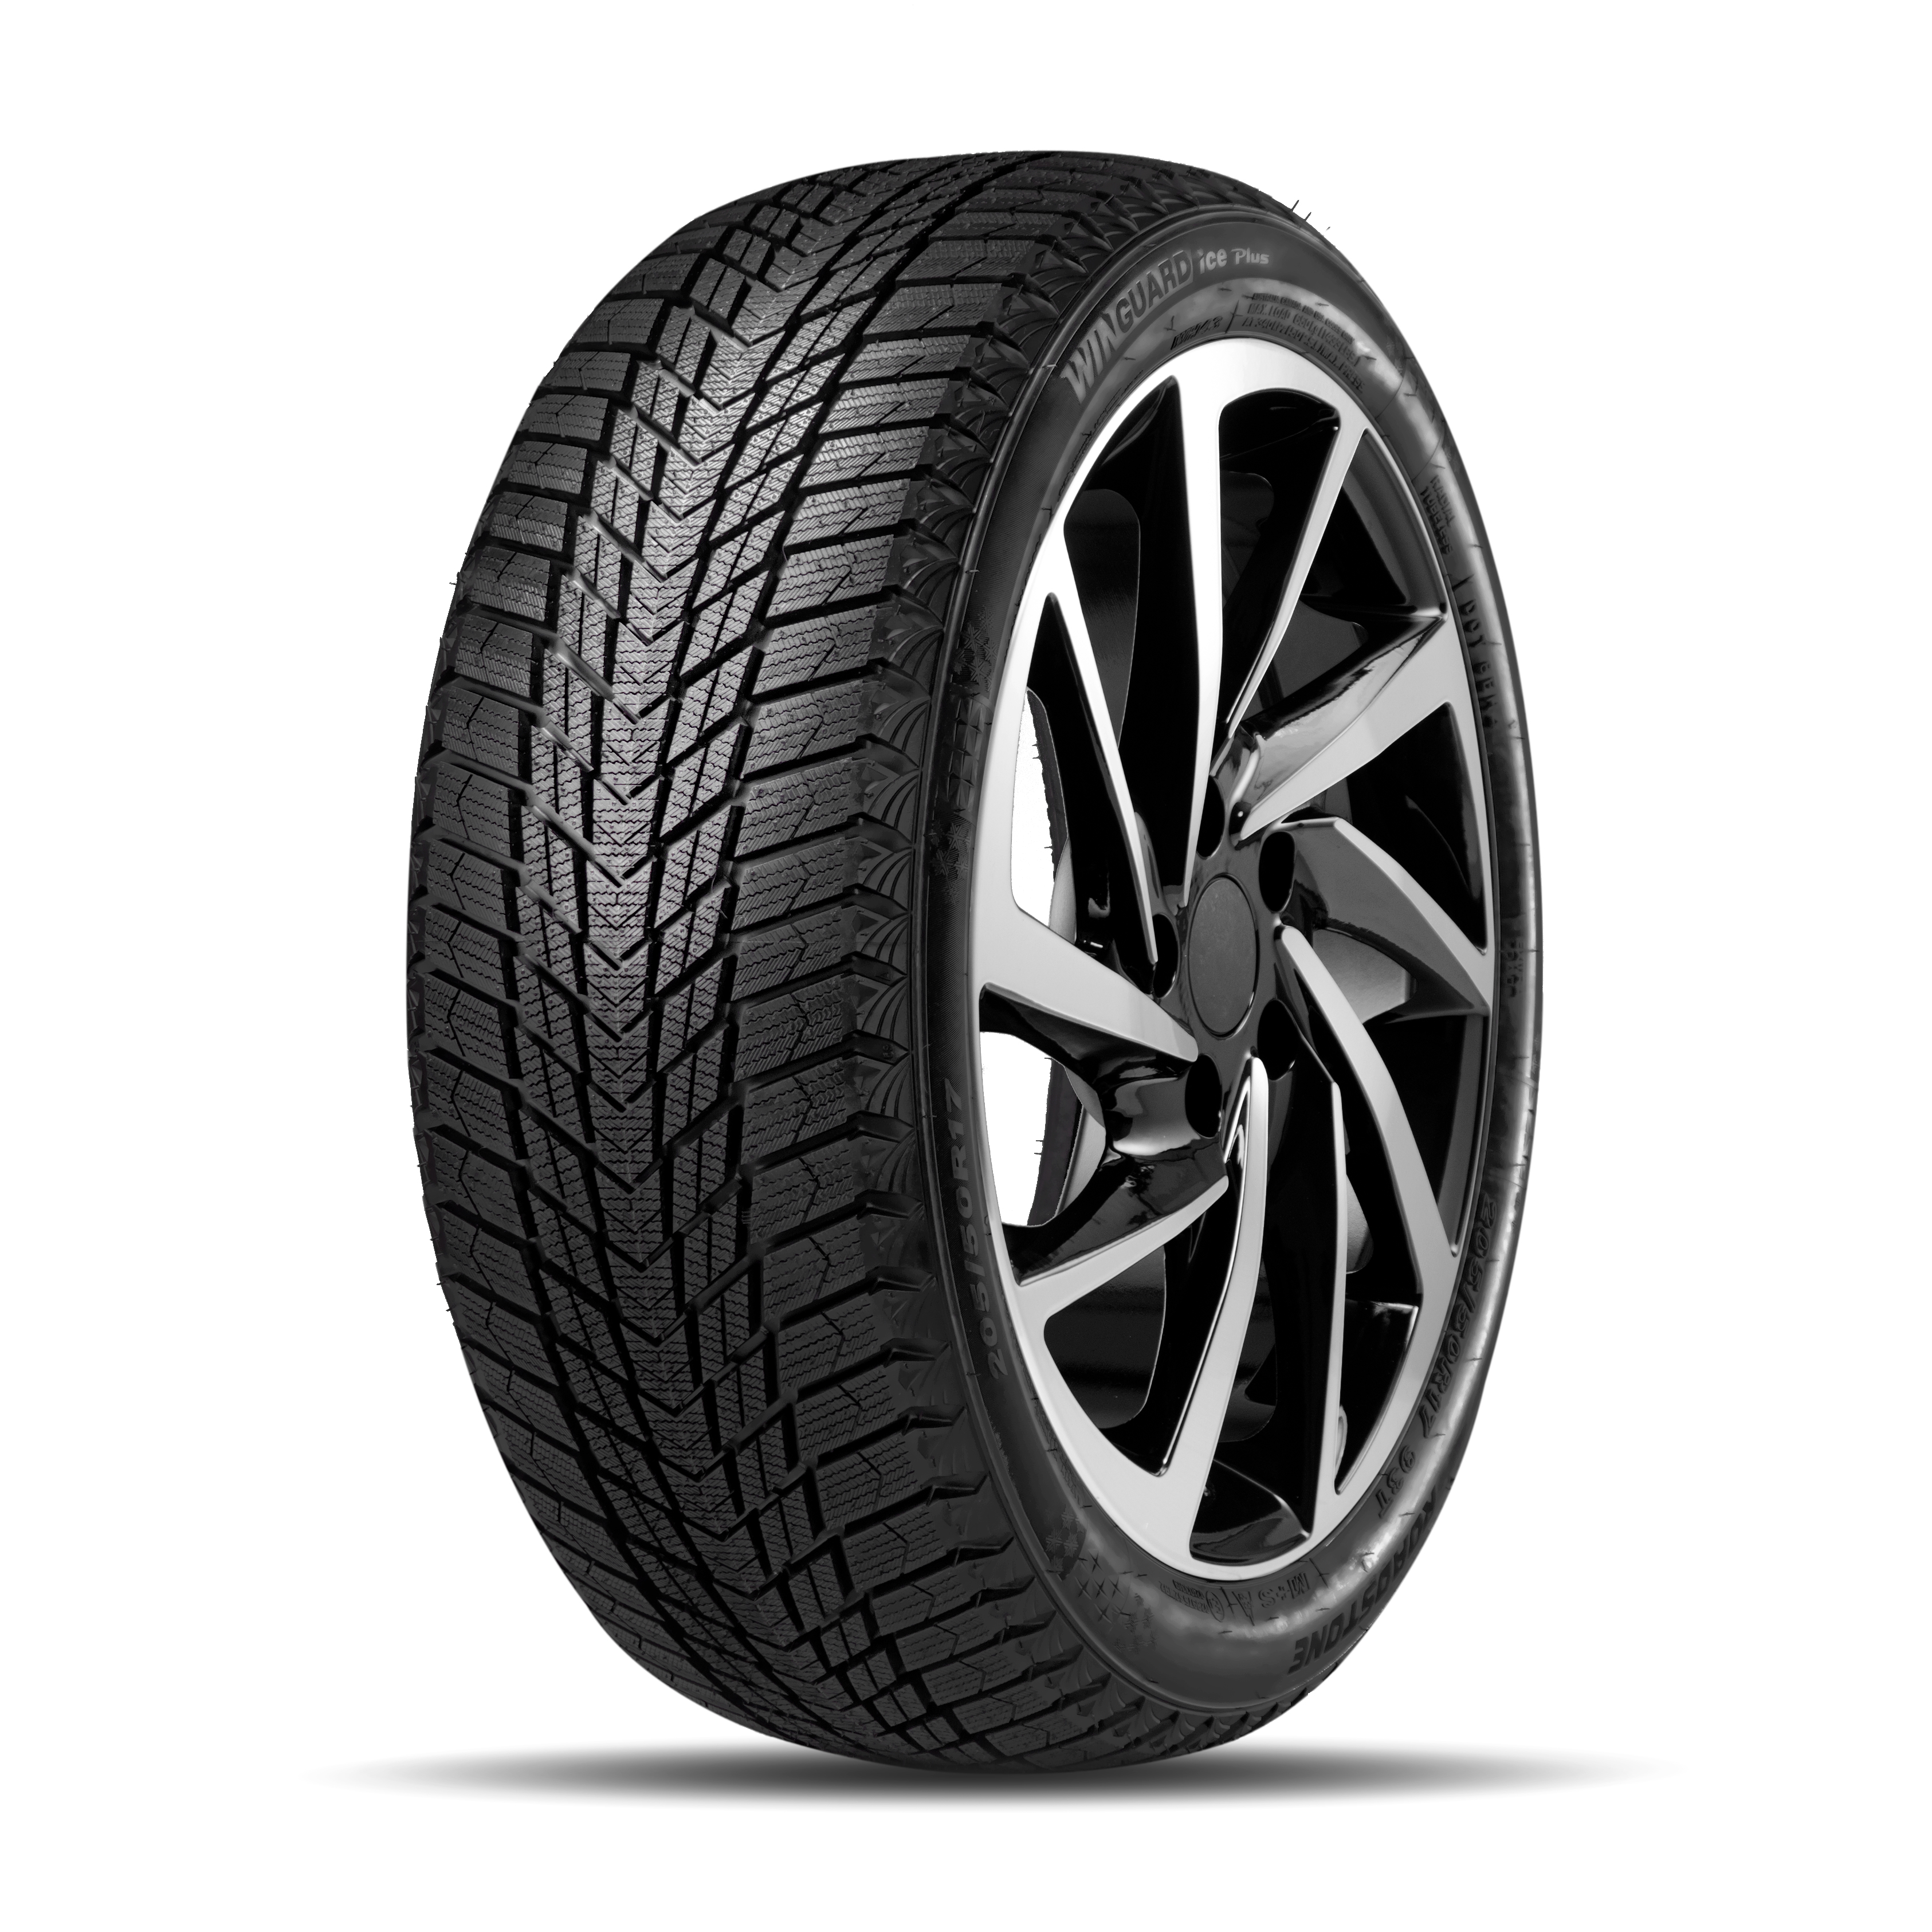 Winguard Ice Plus 205/50 R17 93T icecontact 3 205 50 r17 93t